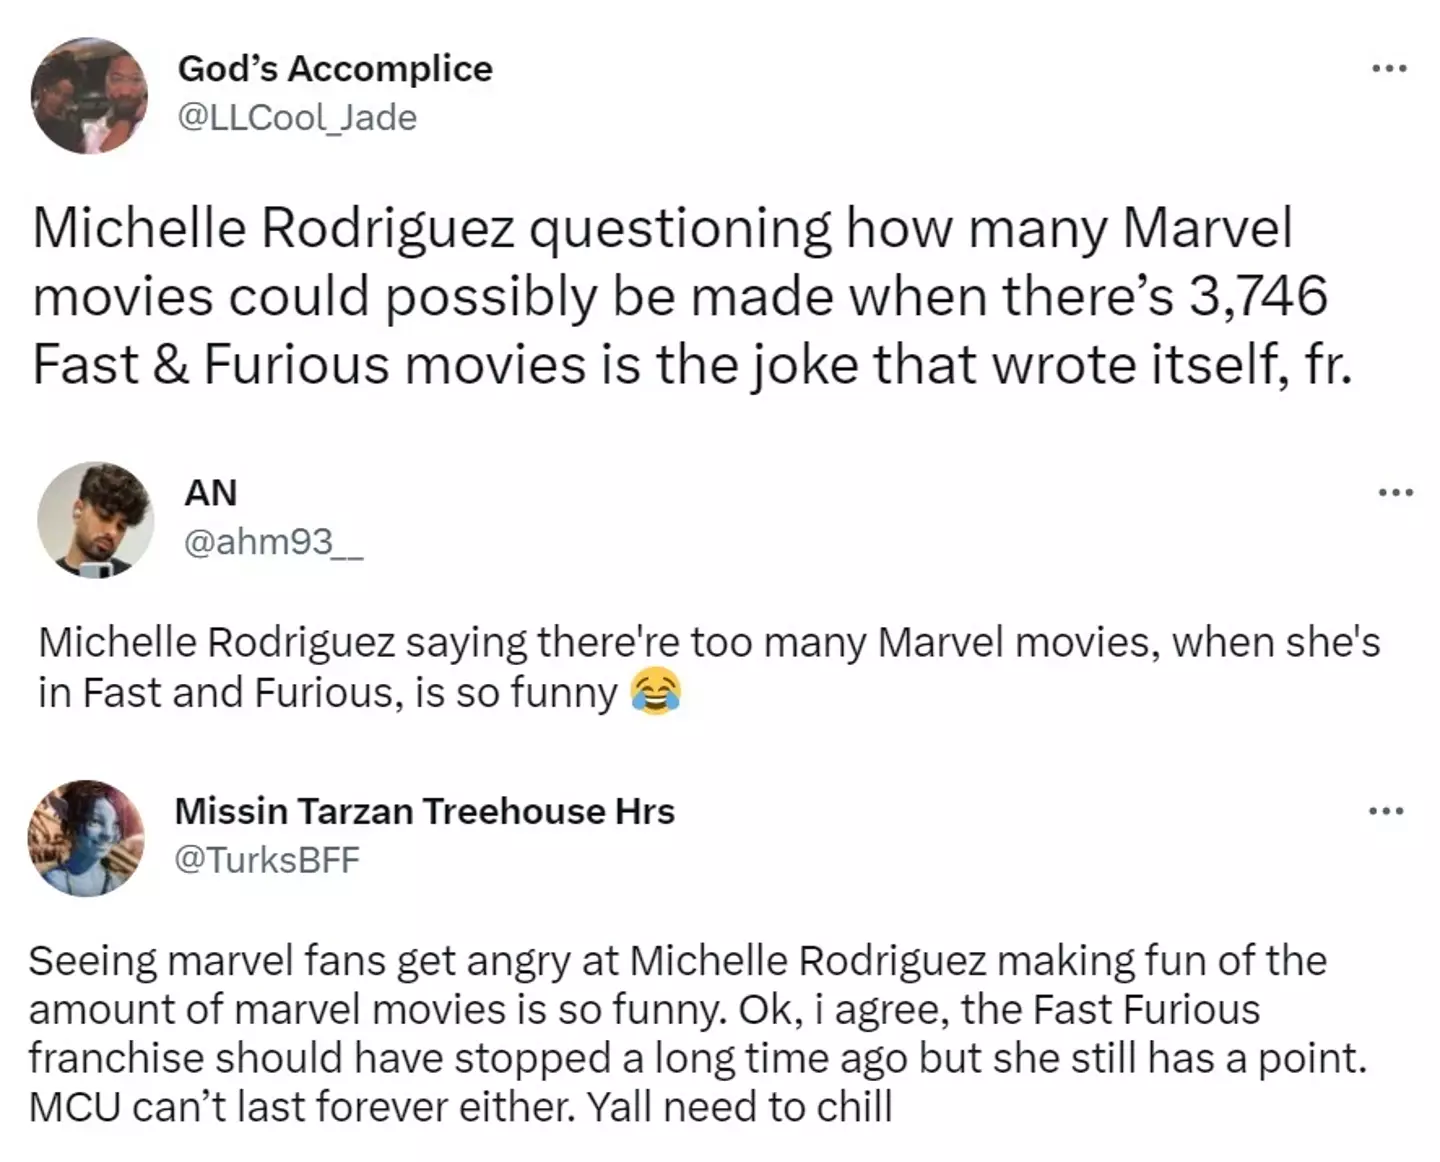 Some fans trolled Rodriguez for her comments, others thought Marvel fans needed to chill out.